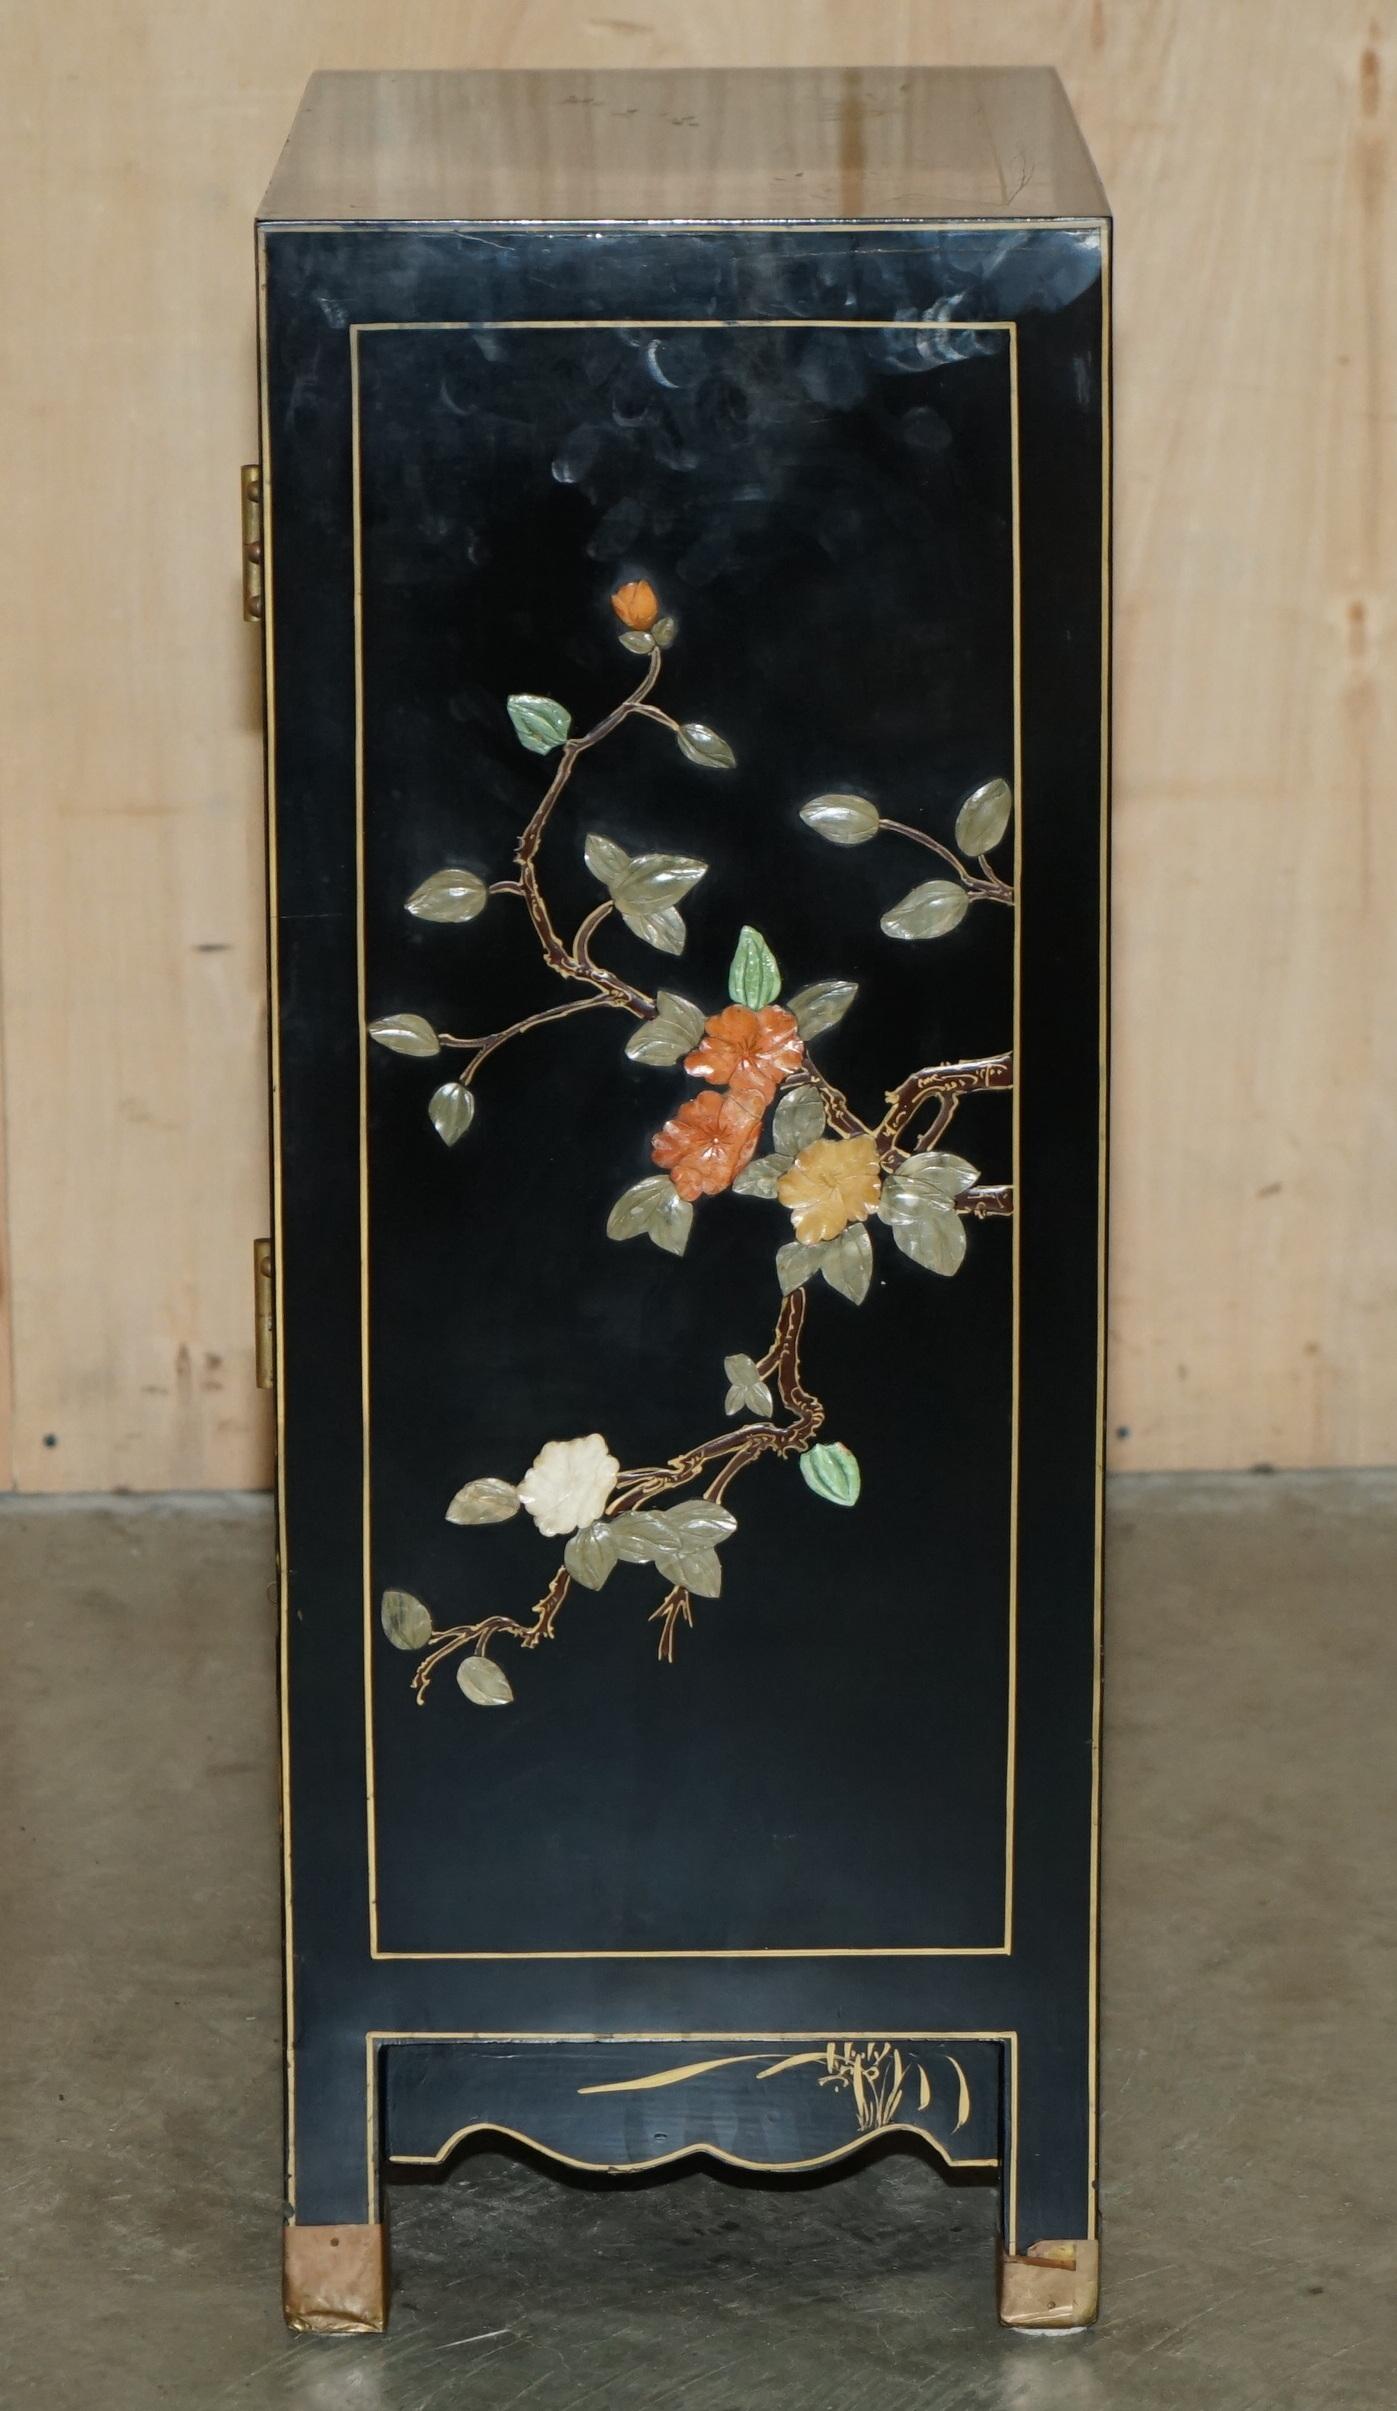 LOVELY ViNTAGE CHINESE CHINOISERIE SAMURAI WARRIOR LACQUER SIDE CABINET SOAPSTON im Angebot 5